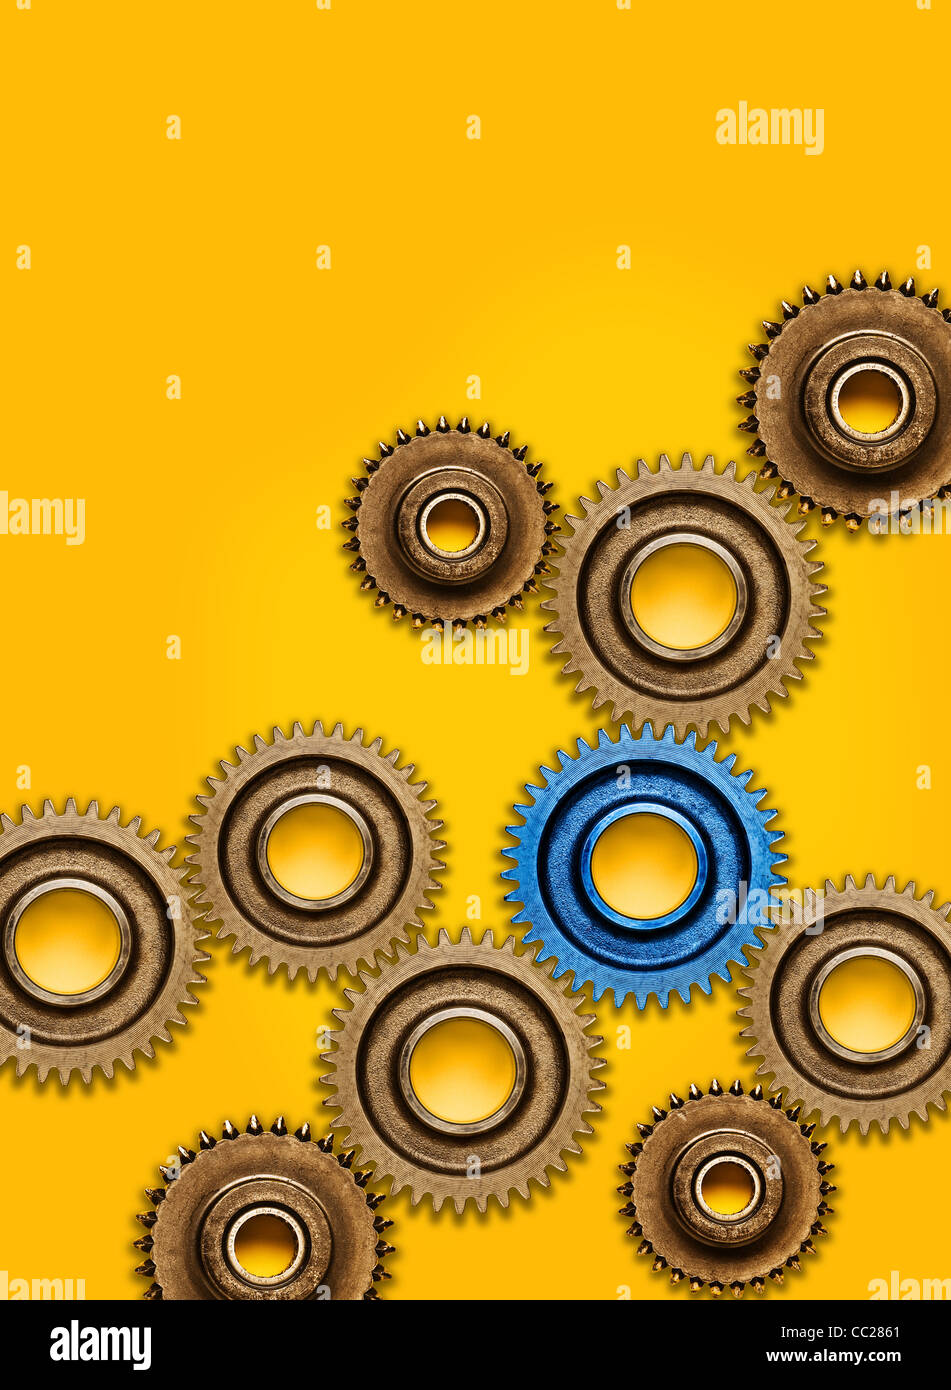 A selection of cogs on a yellow background Stock Photo